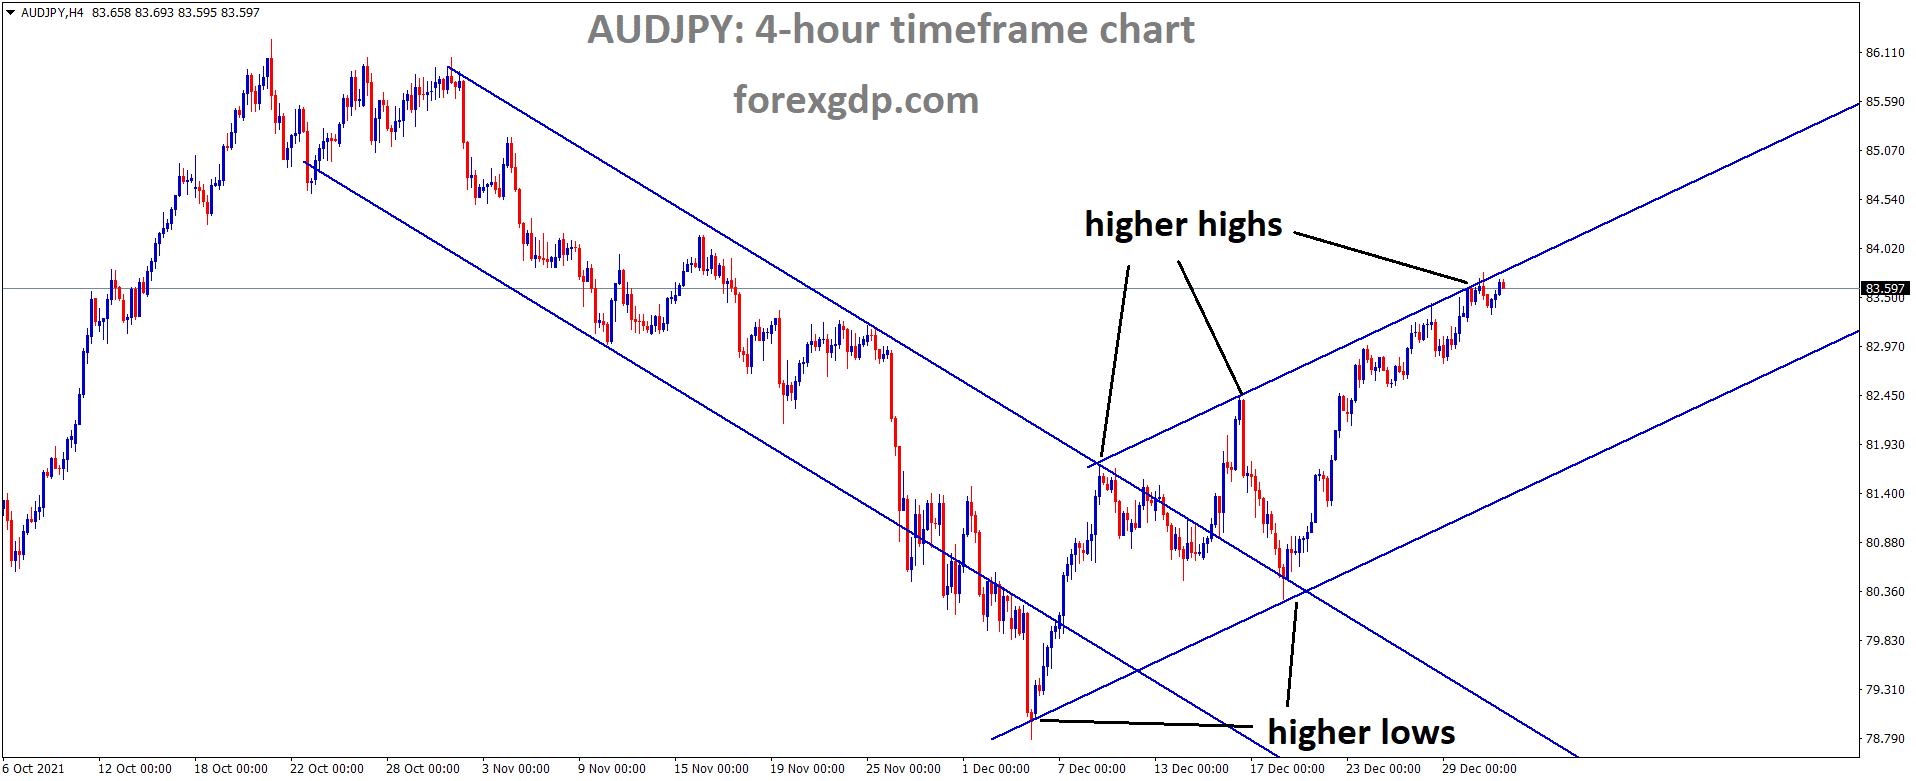 AUDJPY is moving in an Ascending channel and the market has reached the higher high area of the channel 1